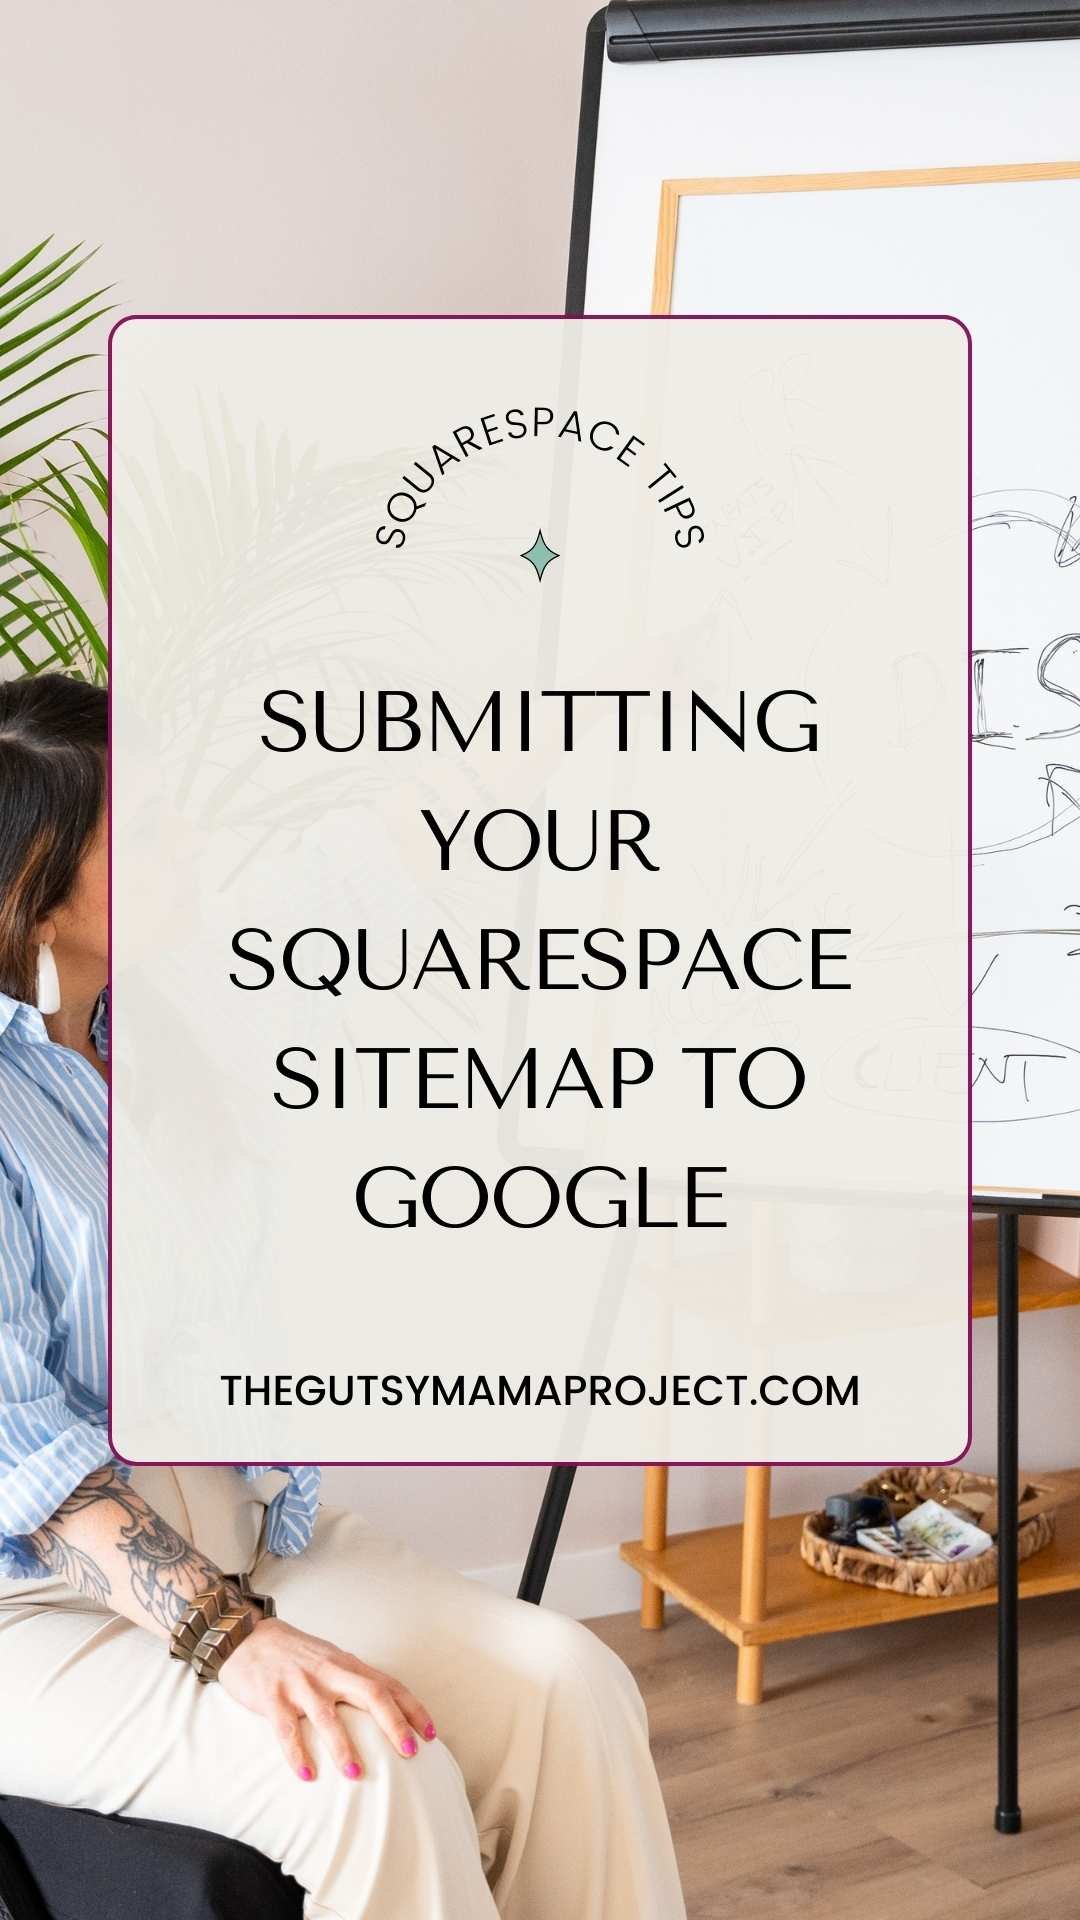 STEP-BY-STEP GUIDE_ SUBMITTING YOUR SQUARESPACE SITEMAP TO GOOGLE -thegutsymamaproject.com (3).jpg